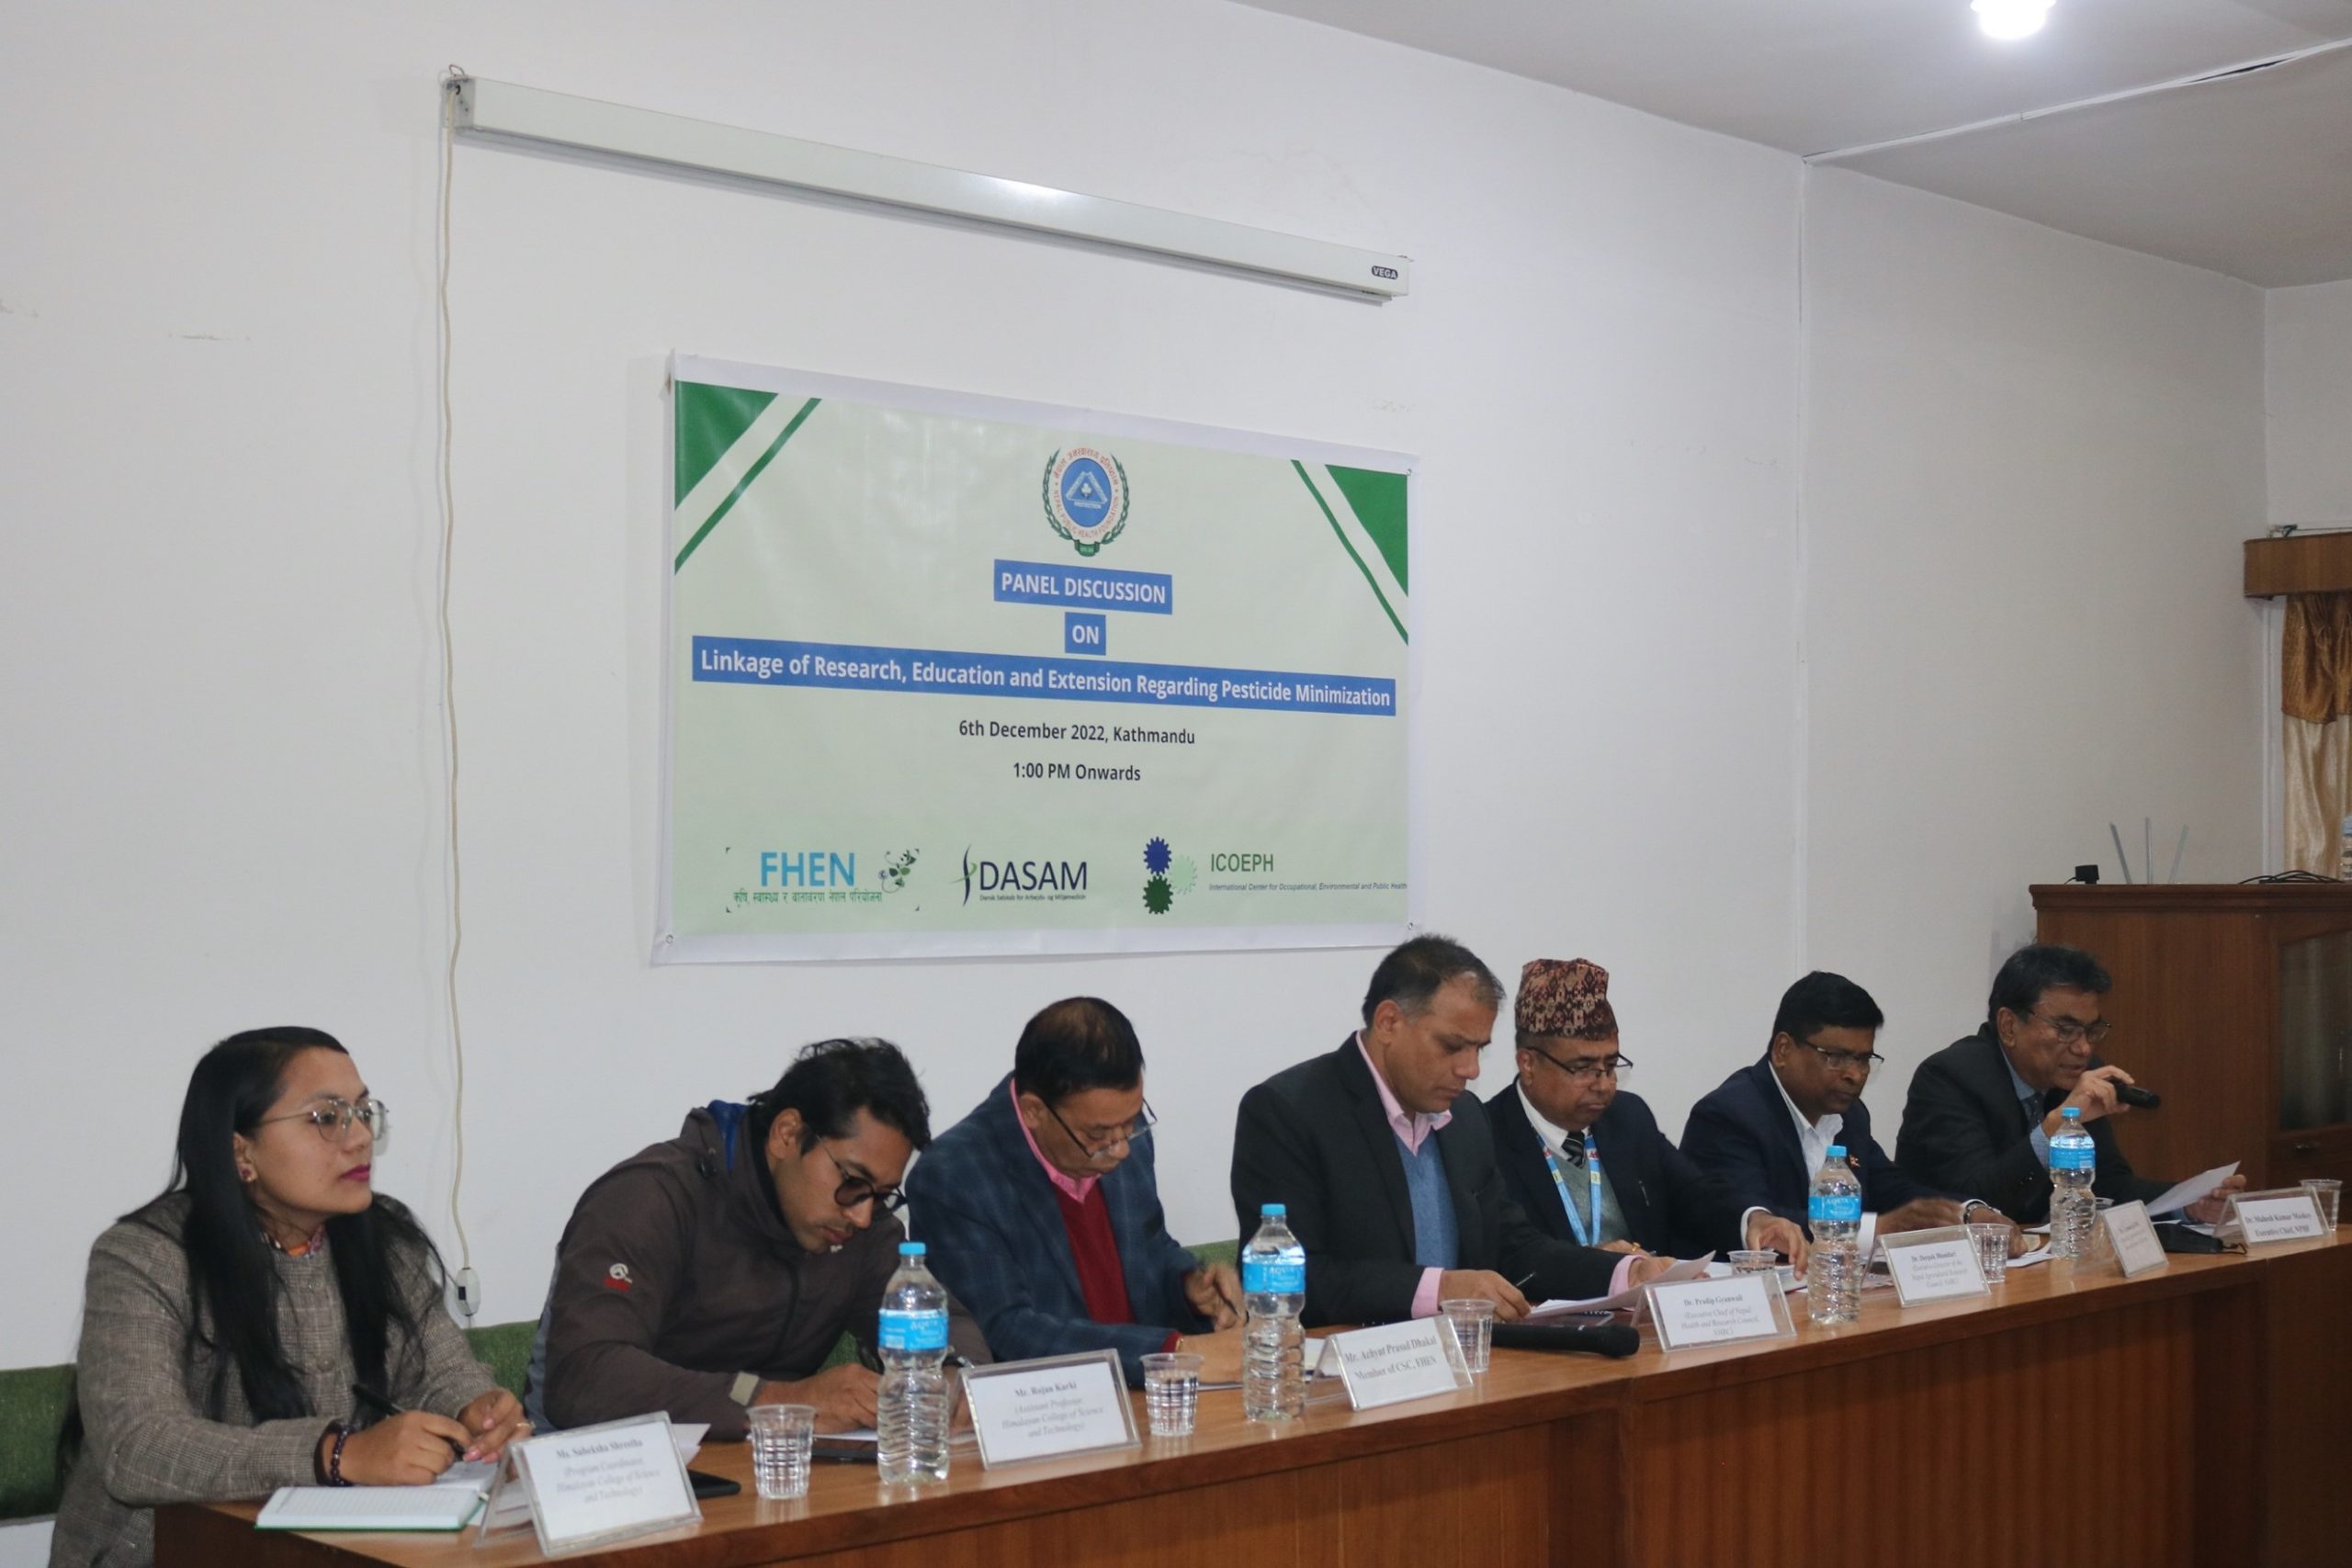 Panel discussion conducted on Linkage of research, education and extension regarding pesticide minimization” on December 6th, 2022 (Mangsir 20, 2079)